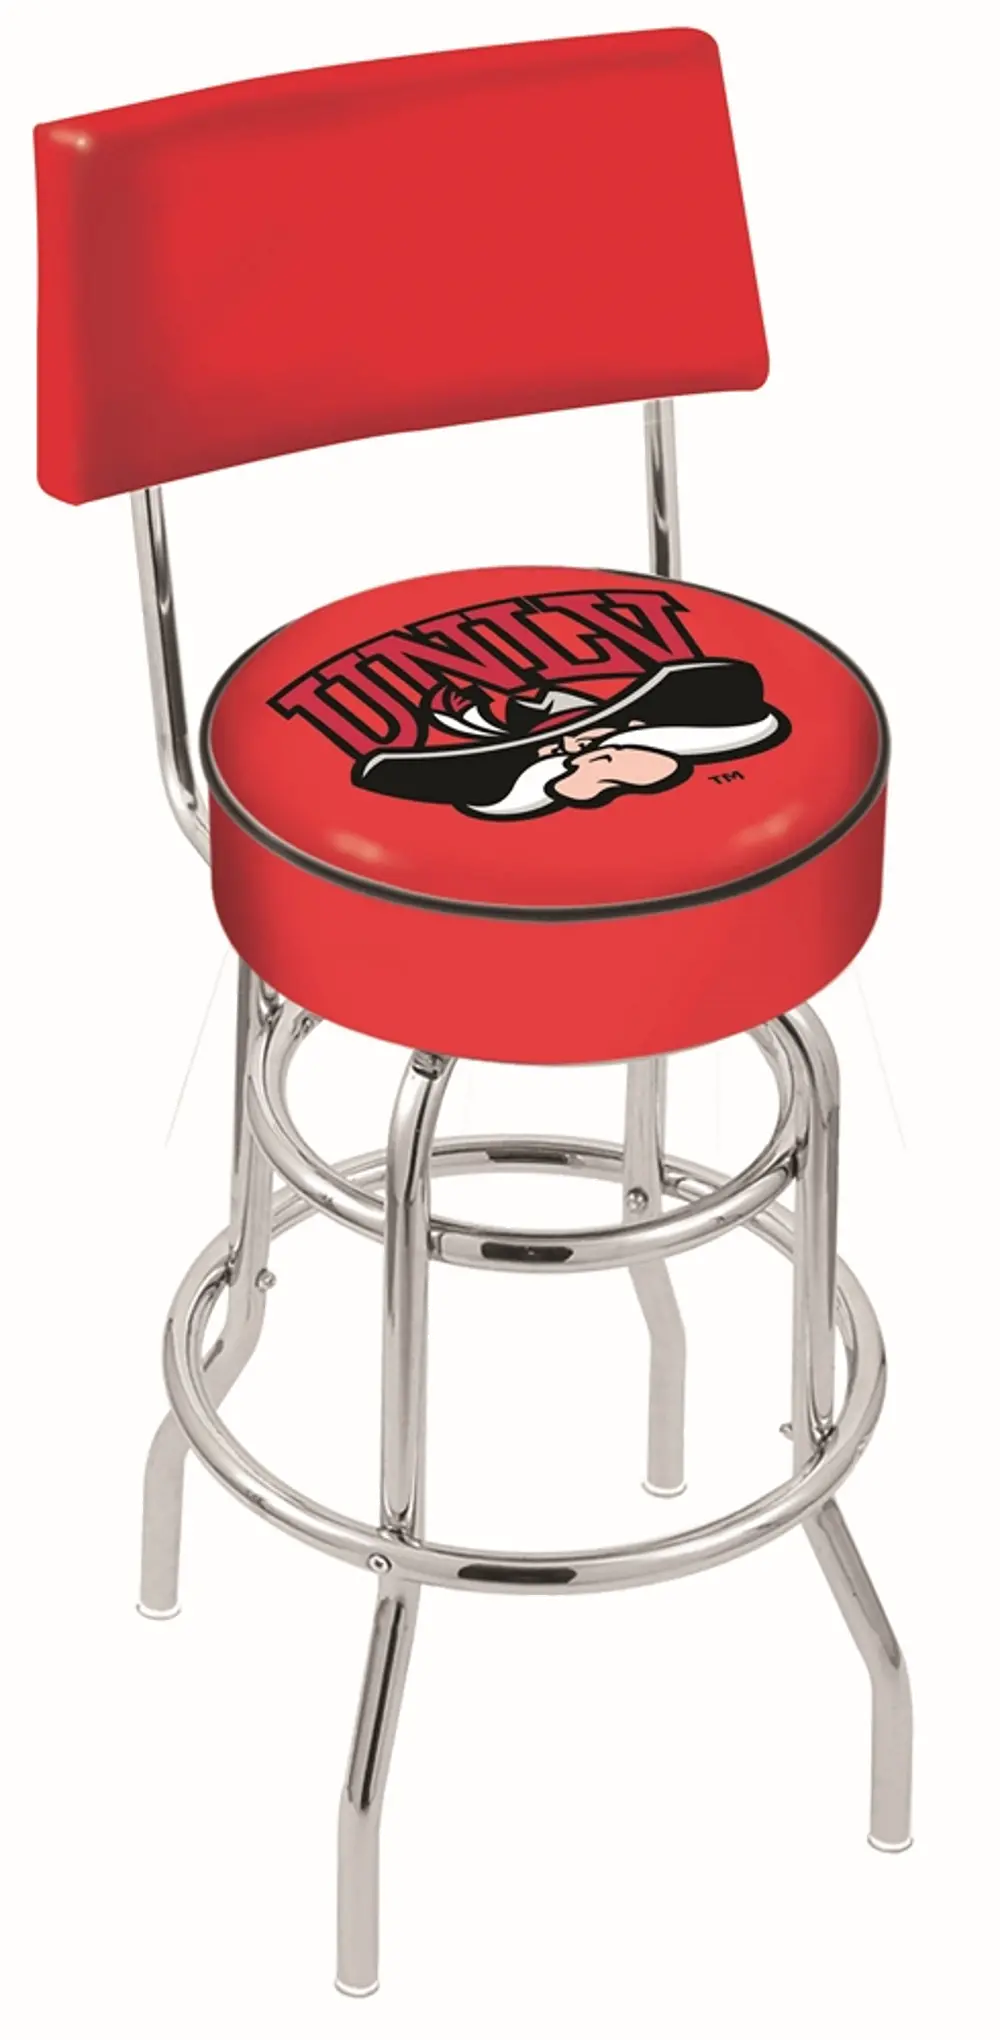 Chrome Swivel Counter Height Stool with Back Rest - UNLV-1